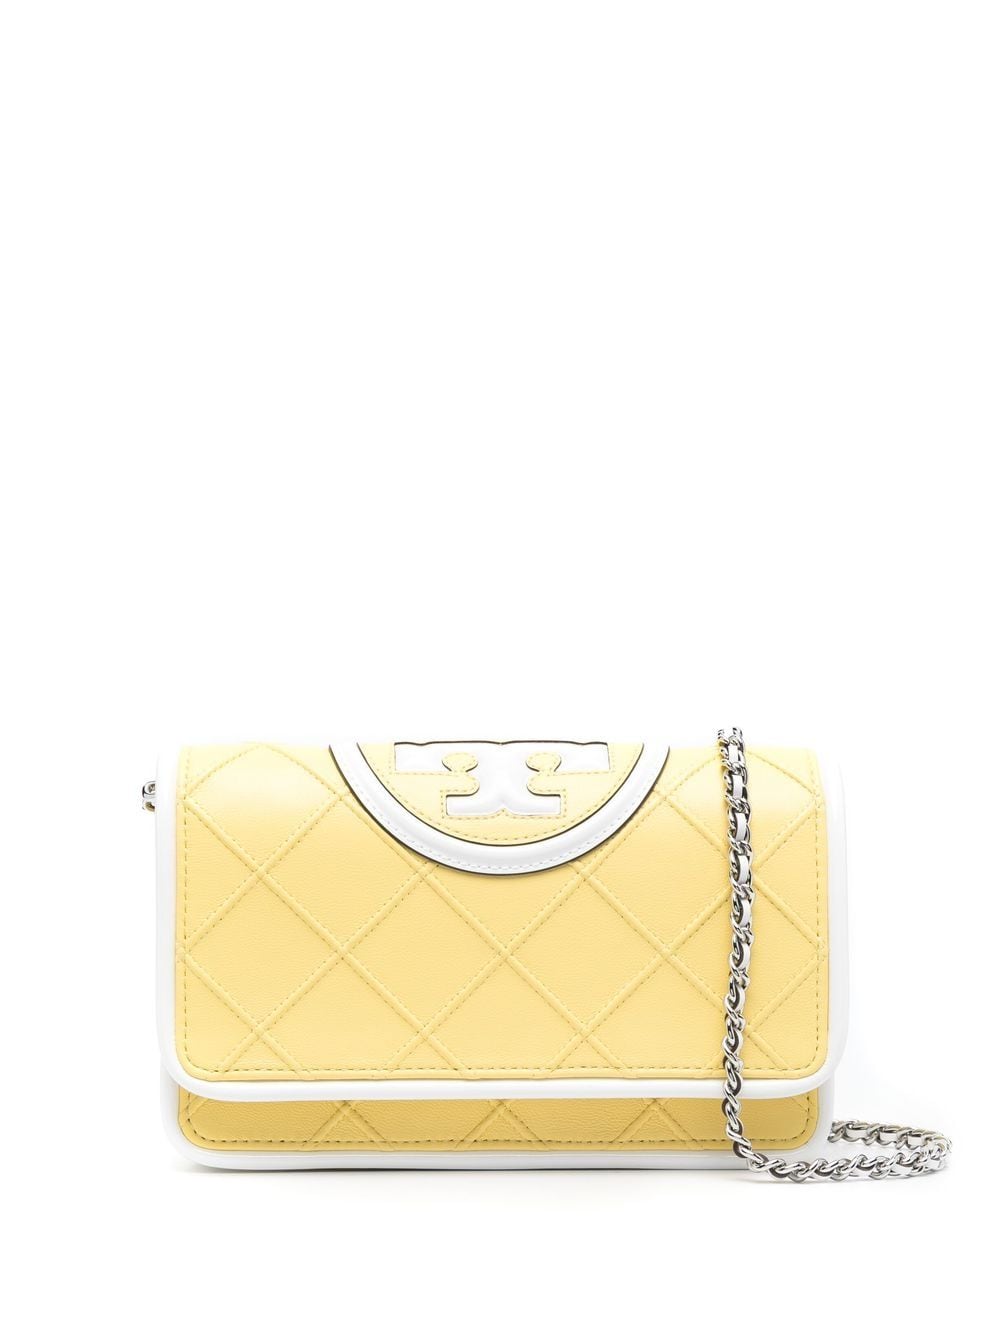 Tory Burch quilted leather crossbody bag - Yellow von Tory Burch